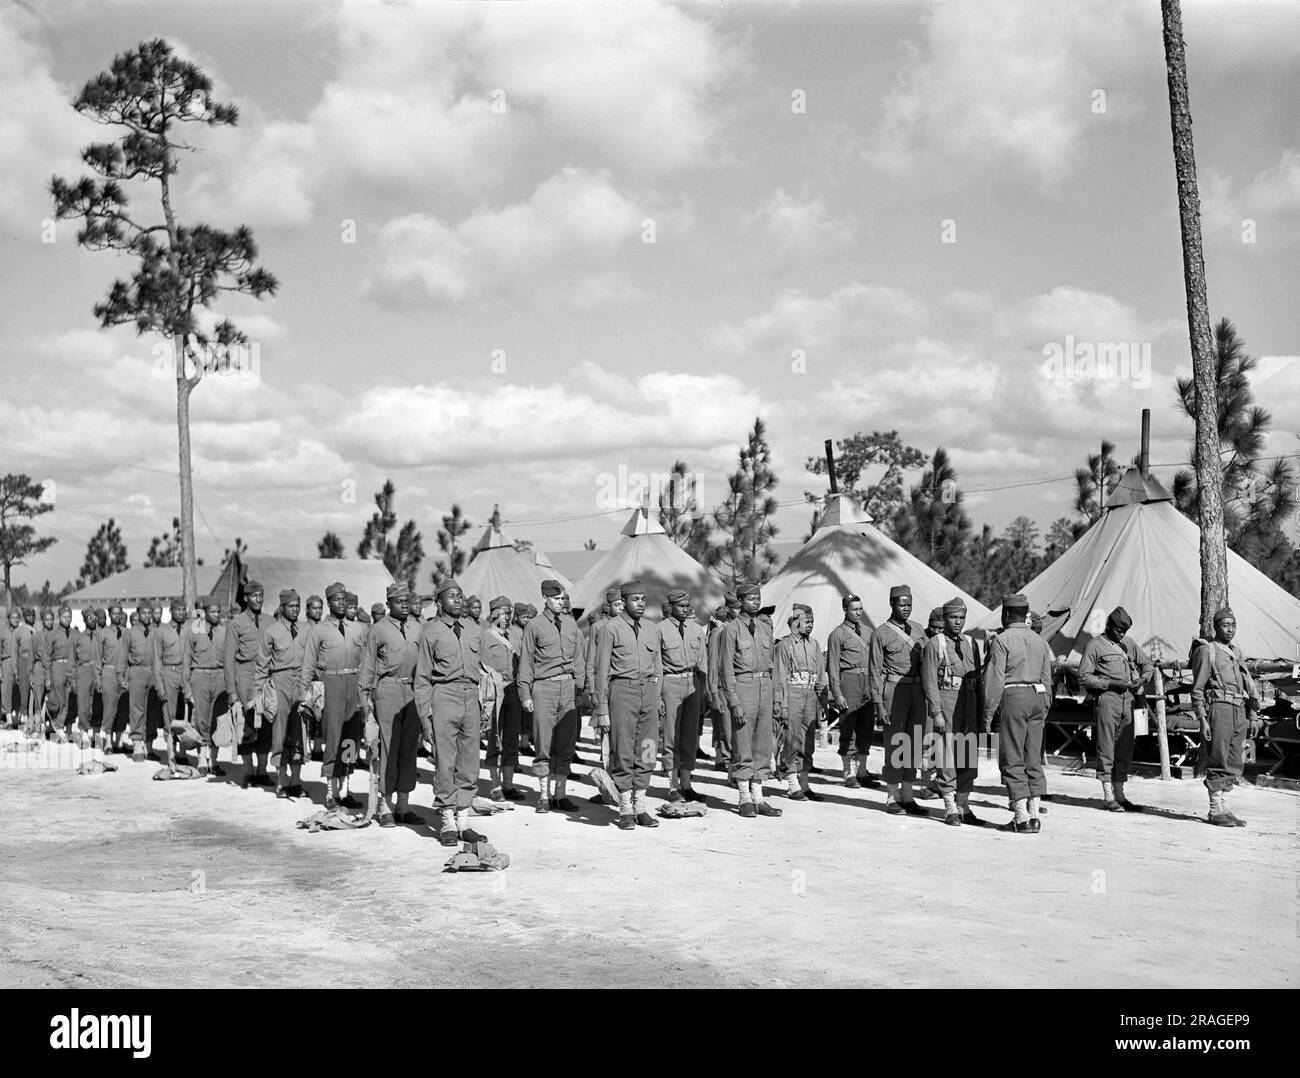 Soldiers of Company J, 41st Engineers, in gas mask drill, Fort Bragg, North Carolina, USA, Arthur Rothstein, U.S. Office of War Information, March 1942 Stock Photo